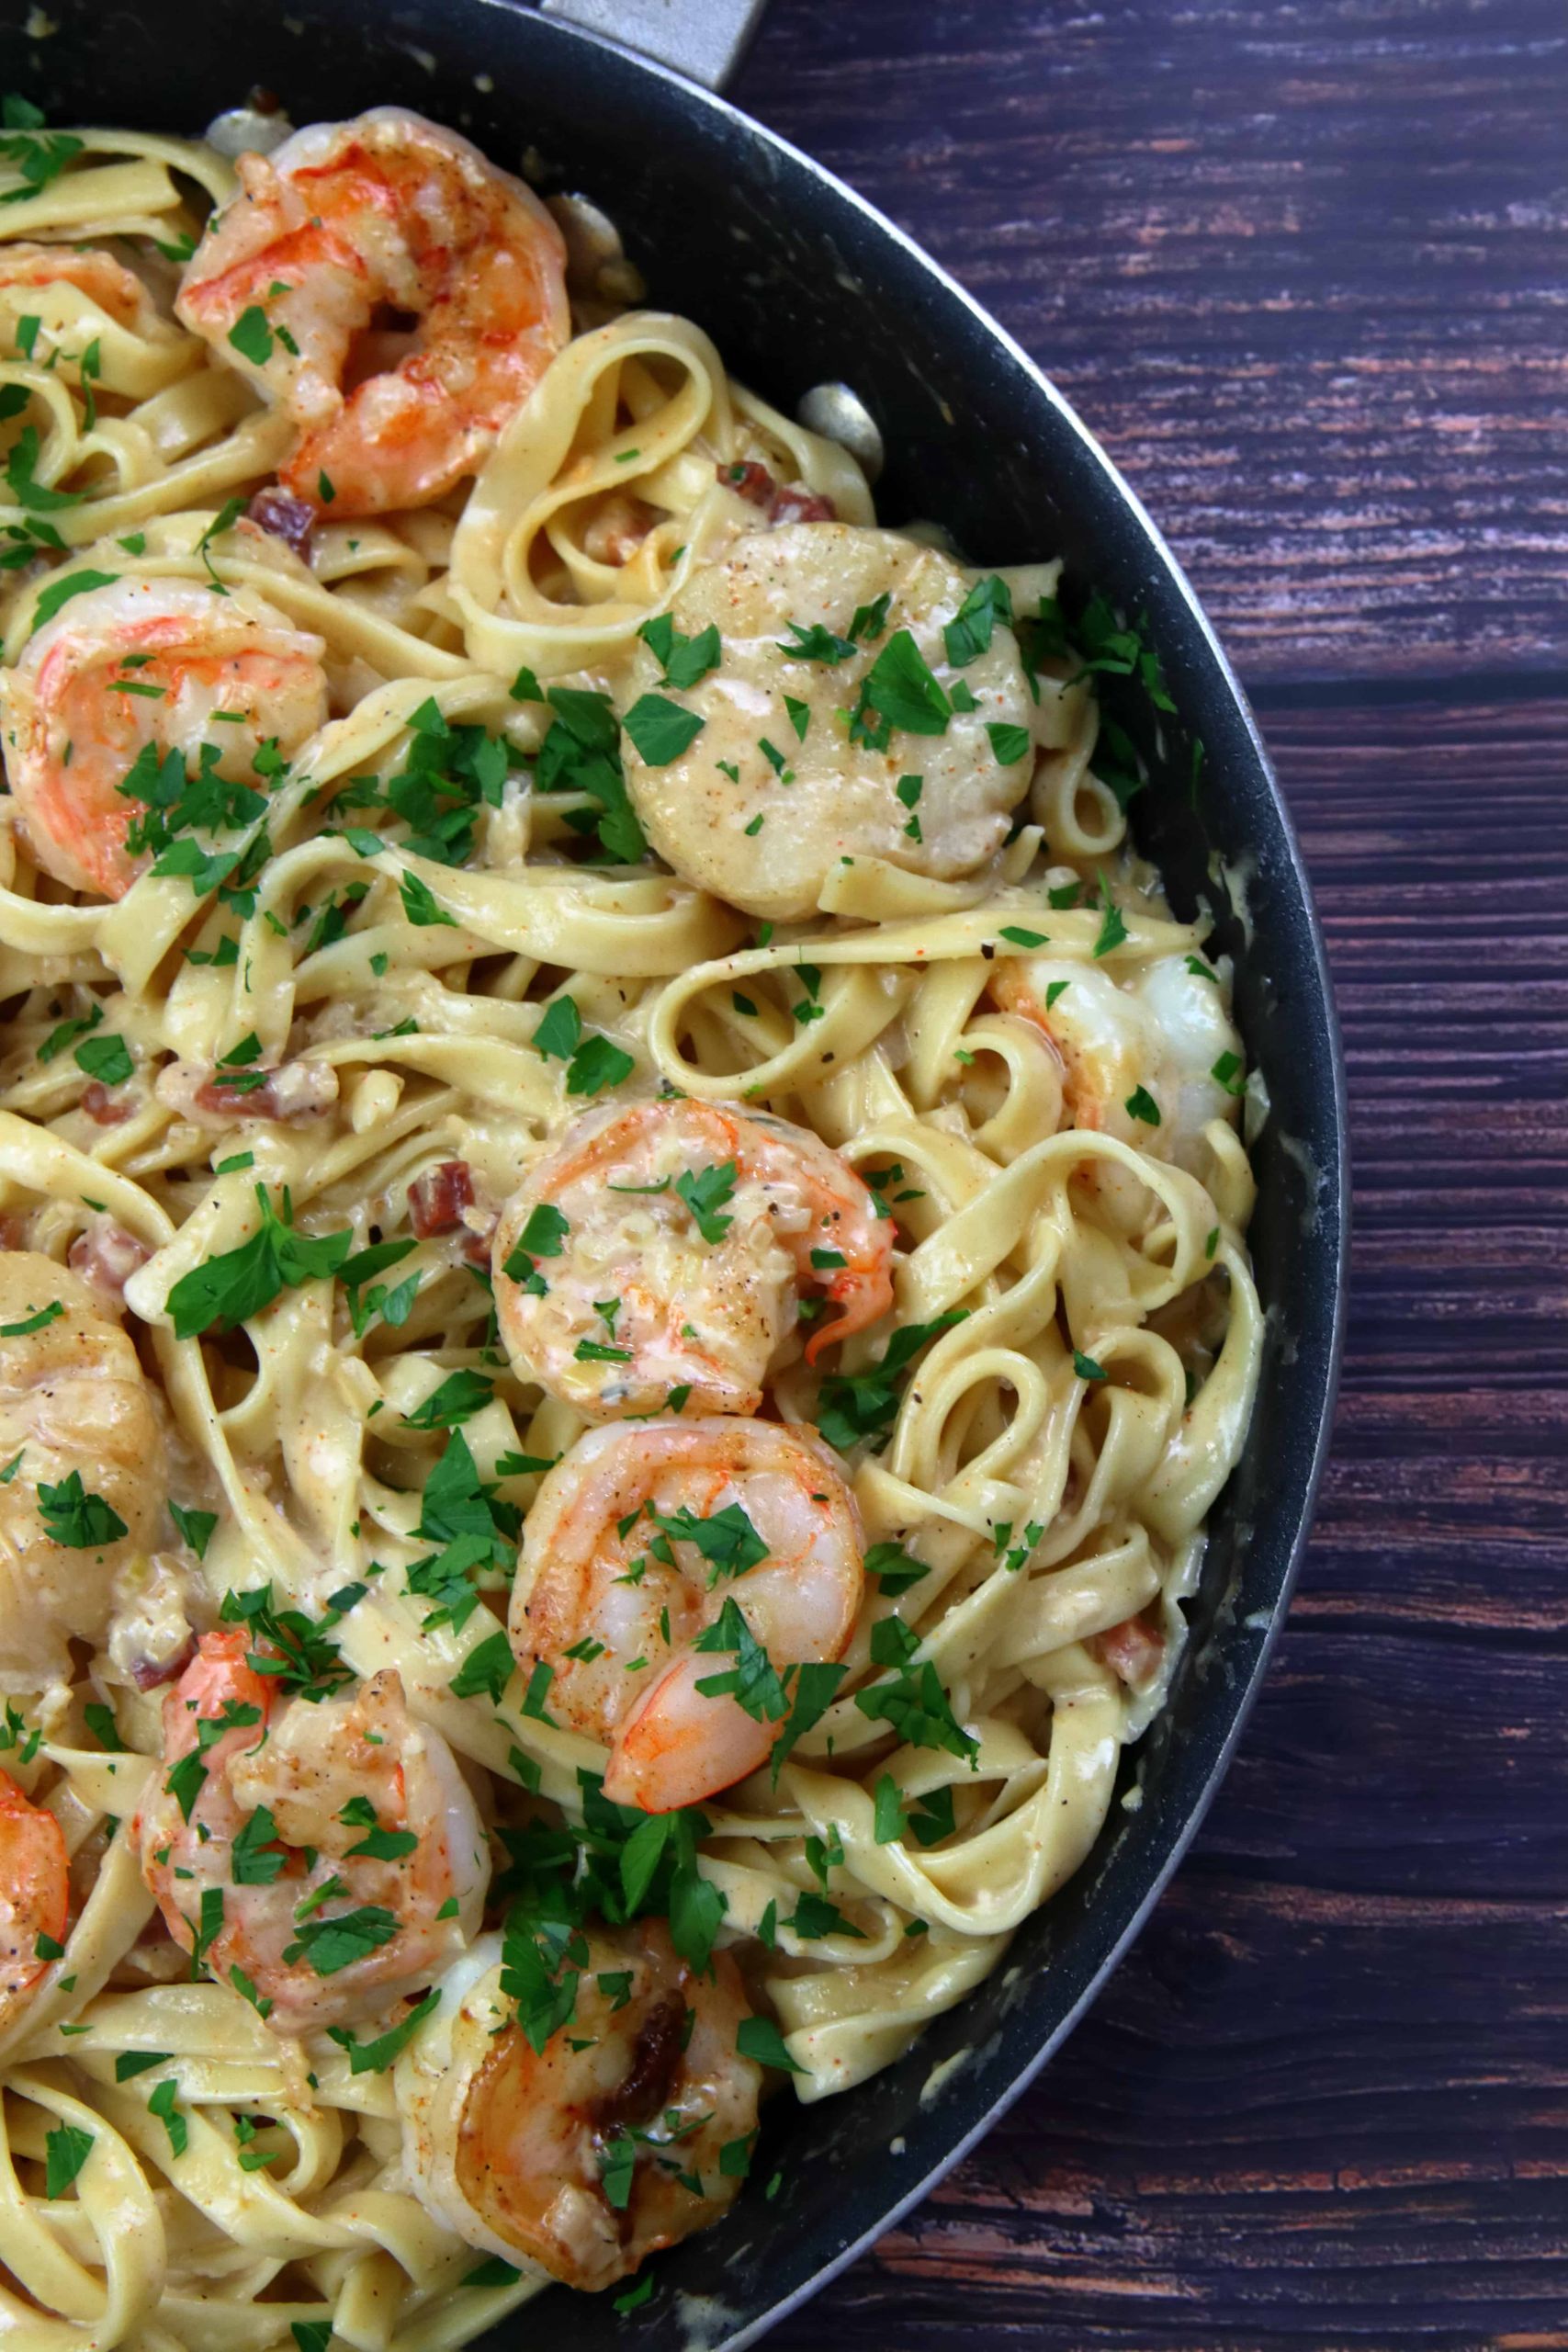 15 Amazing Shrimp and Scallop Pasta with White Wine Sauce